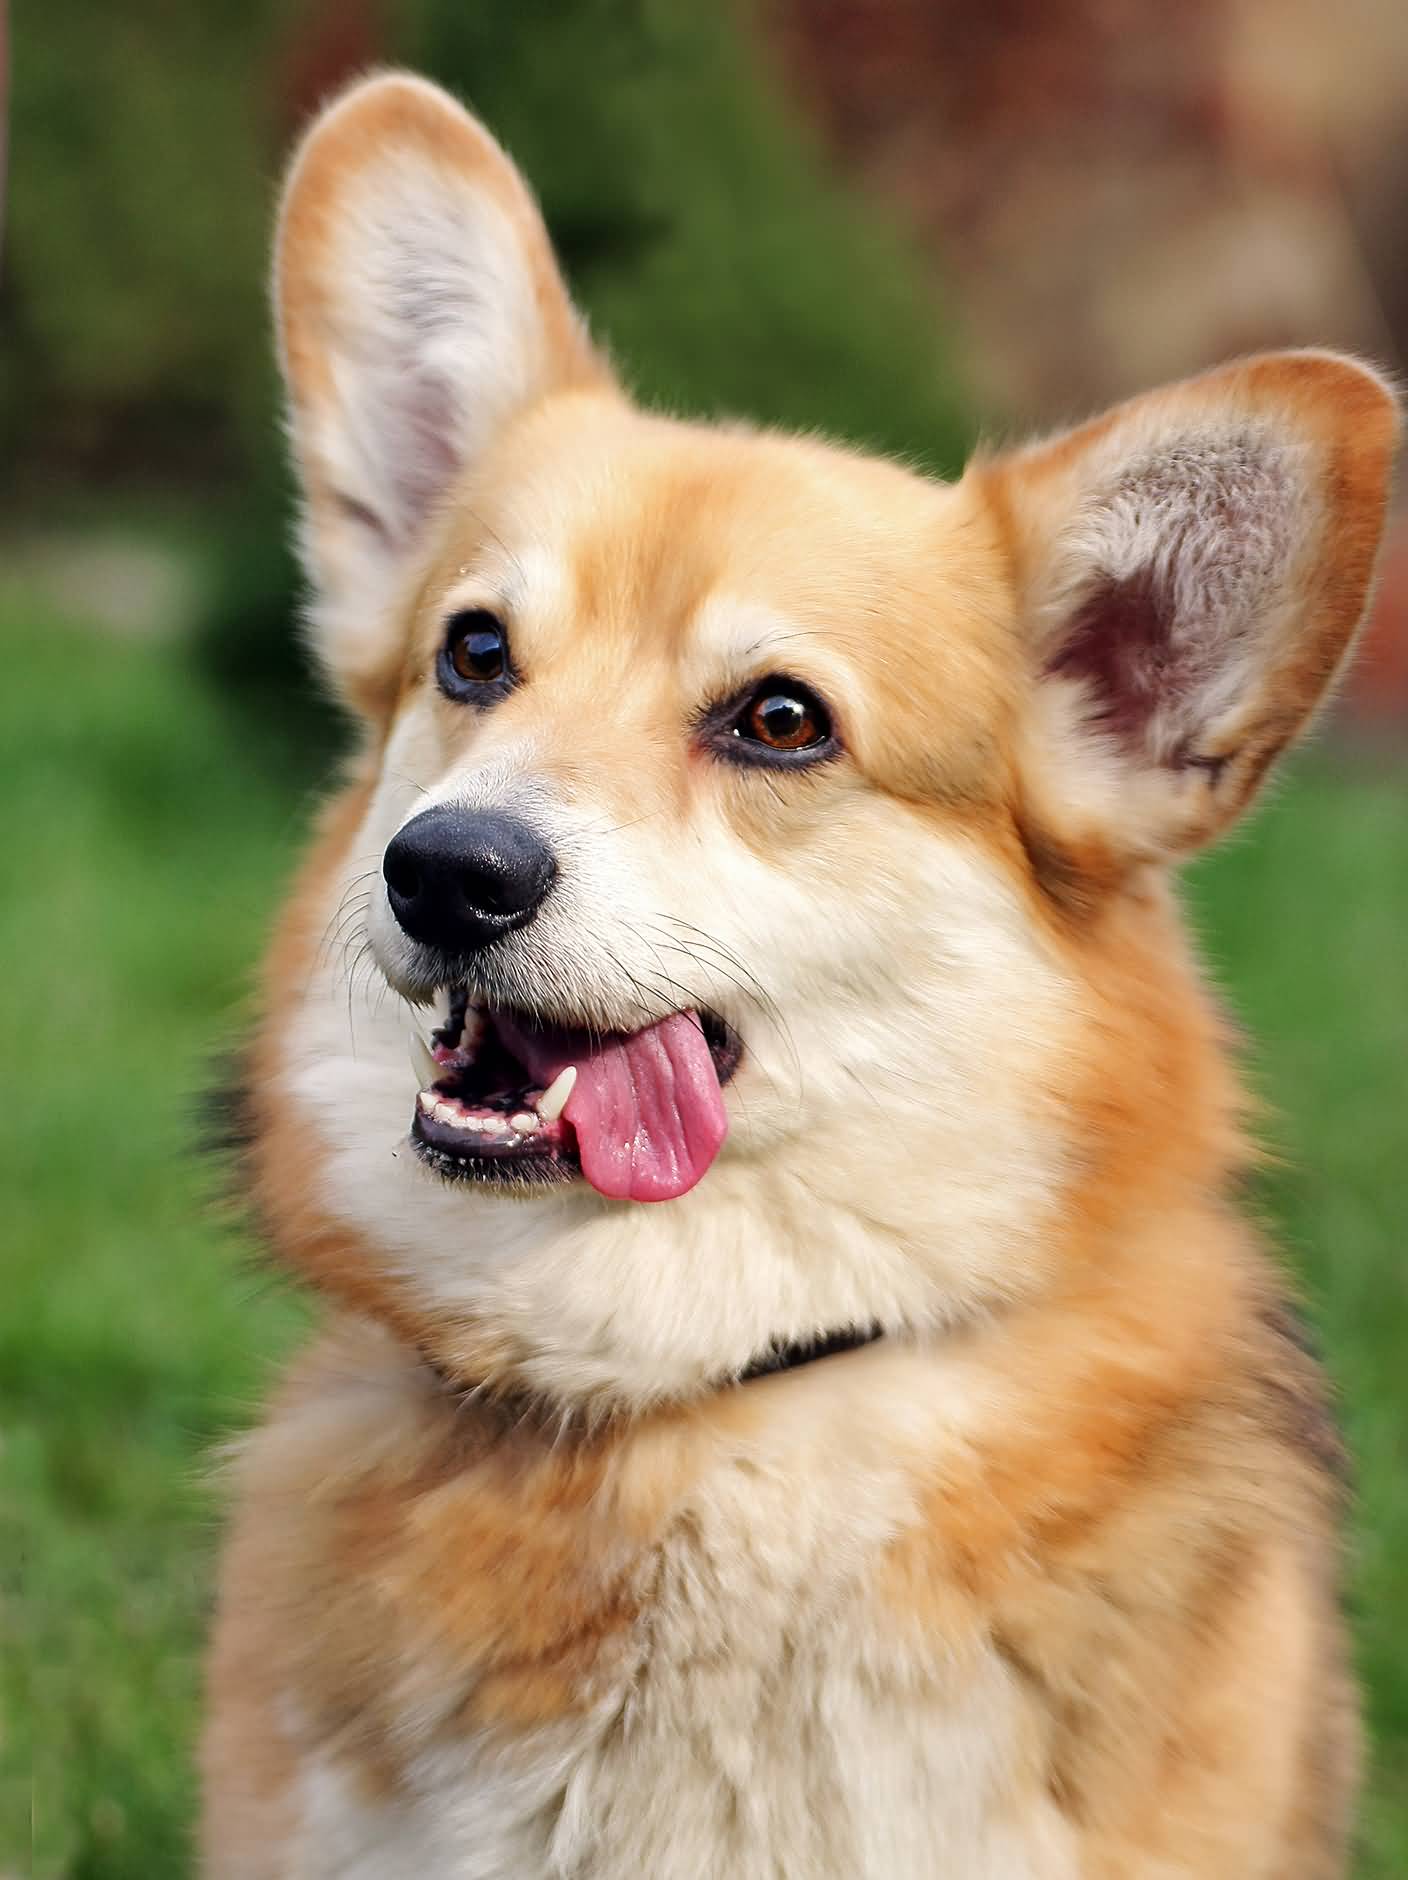 Pembroke Welsh Corgi Dog With Tongue Out Picture